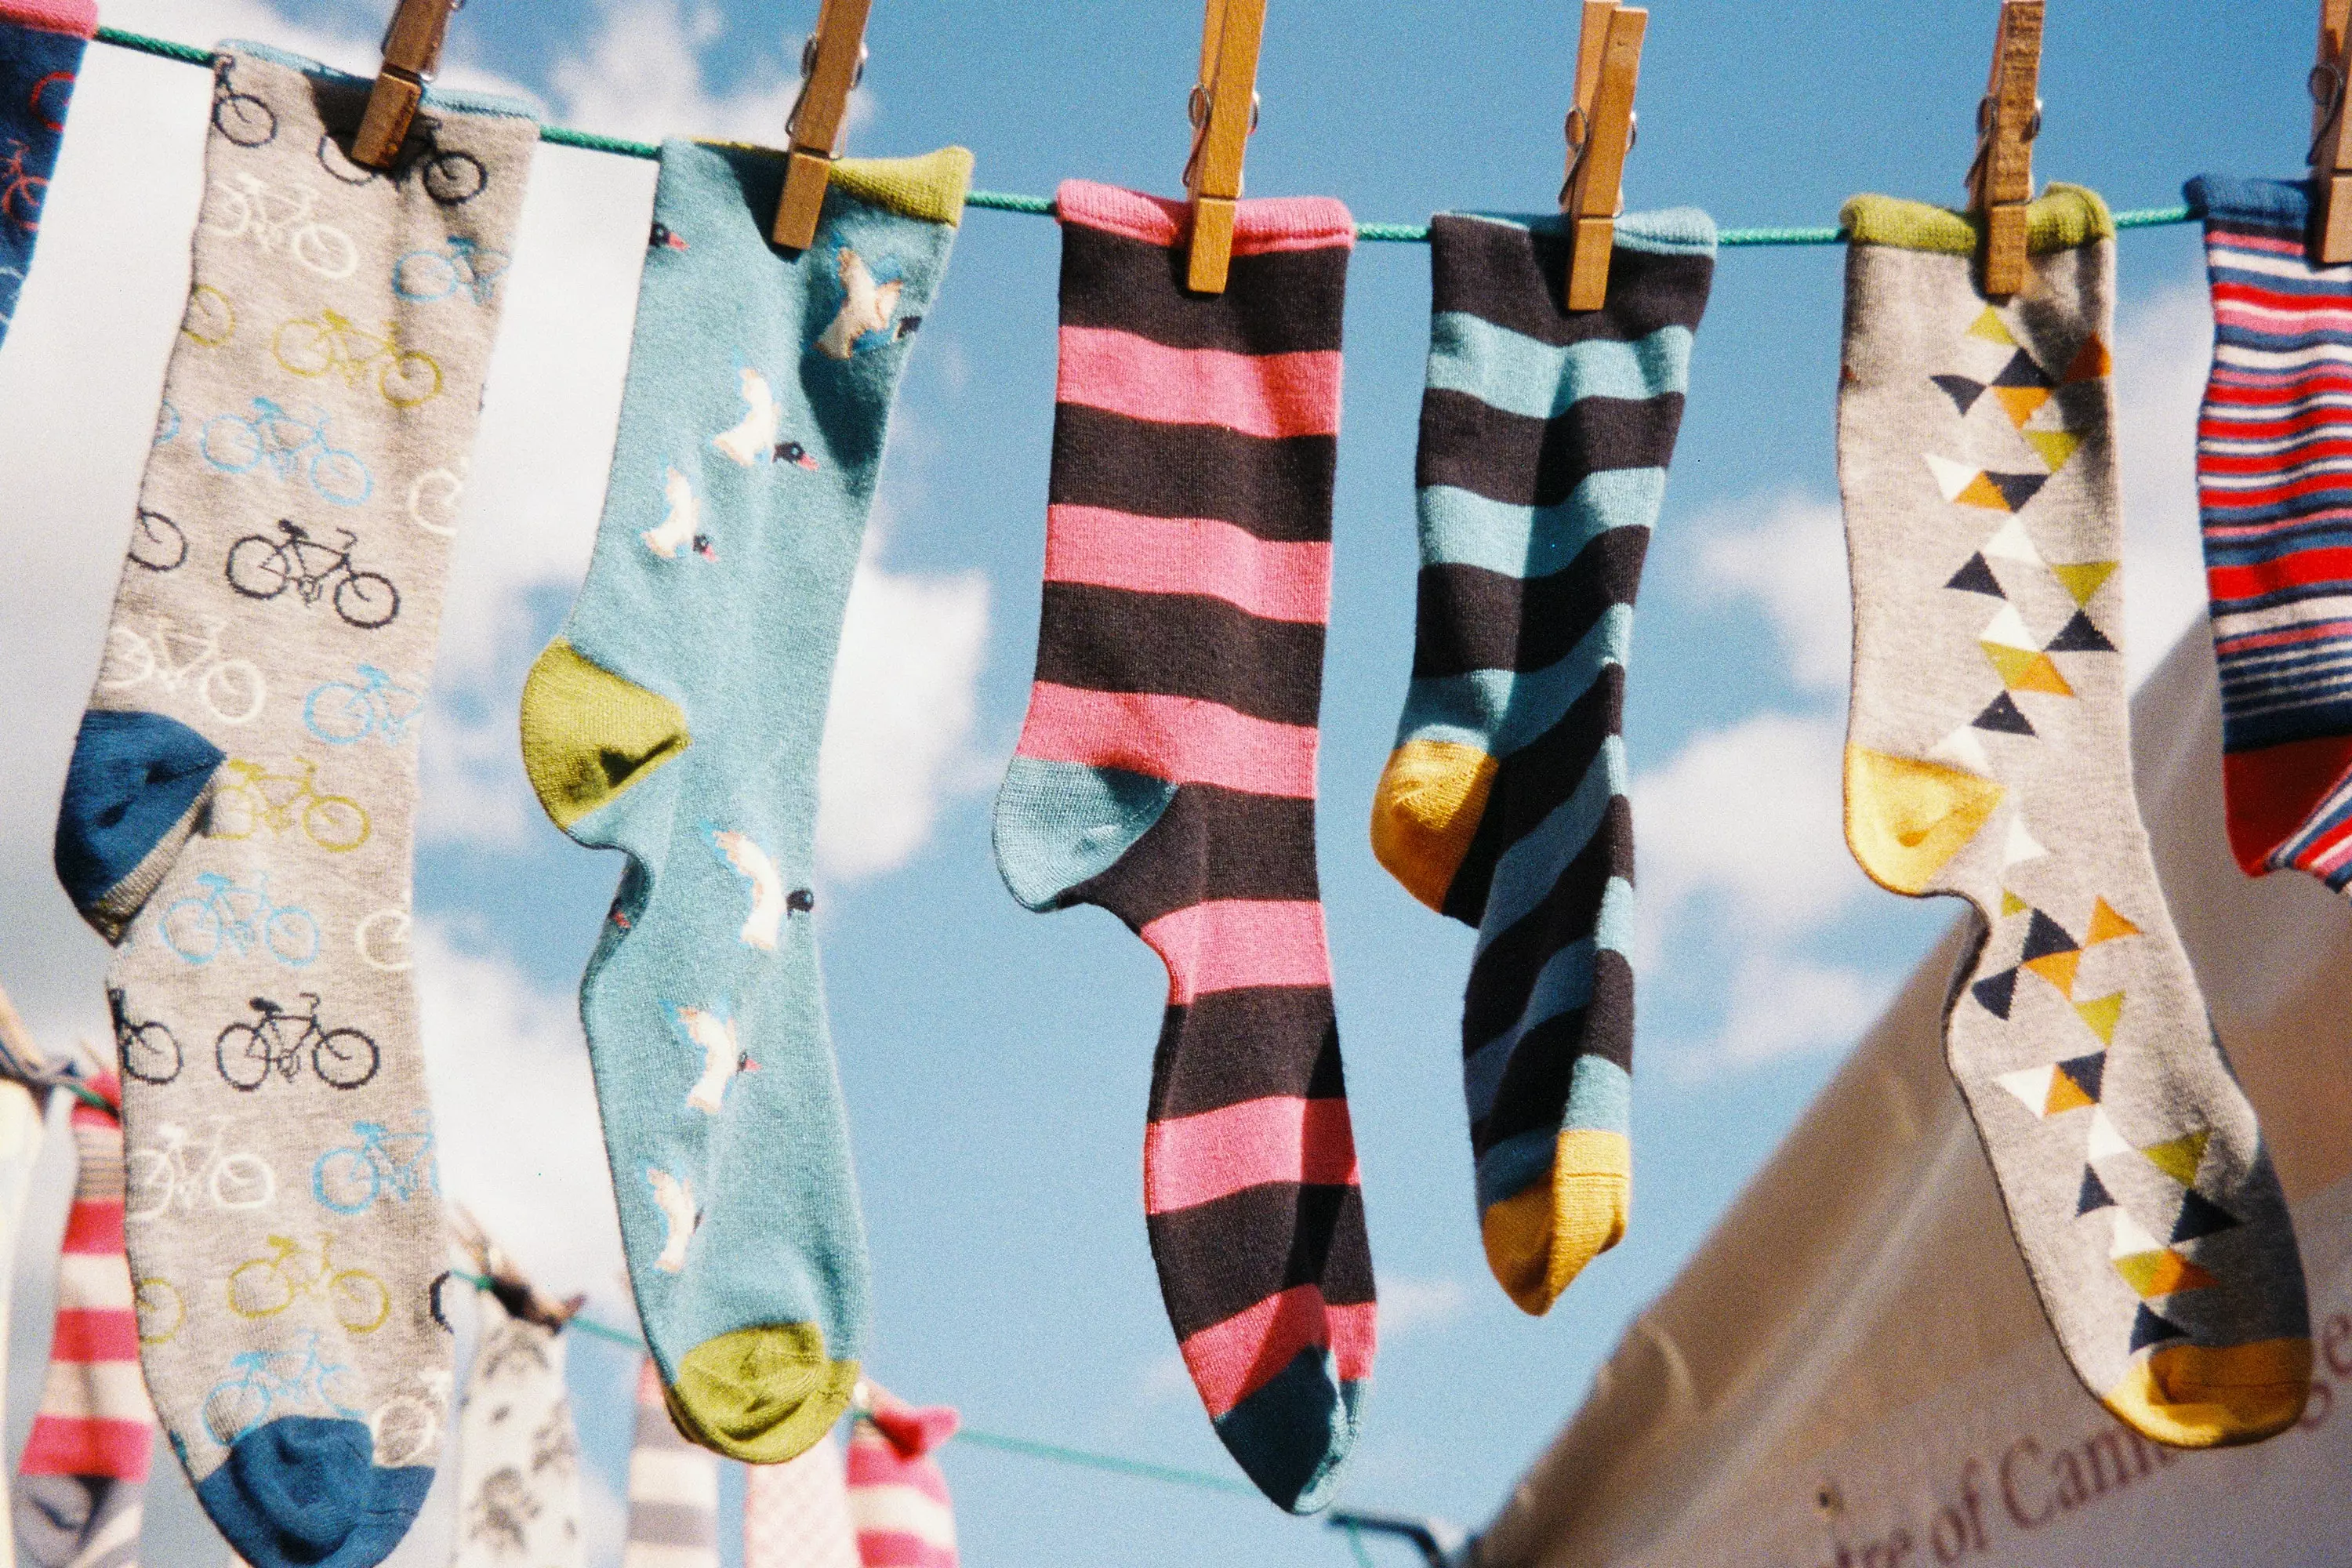 Hay fever sufferers shoudl avoid hanging their laundry outside to dry (